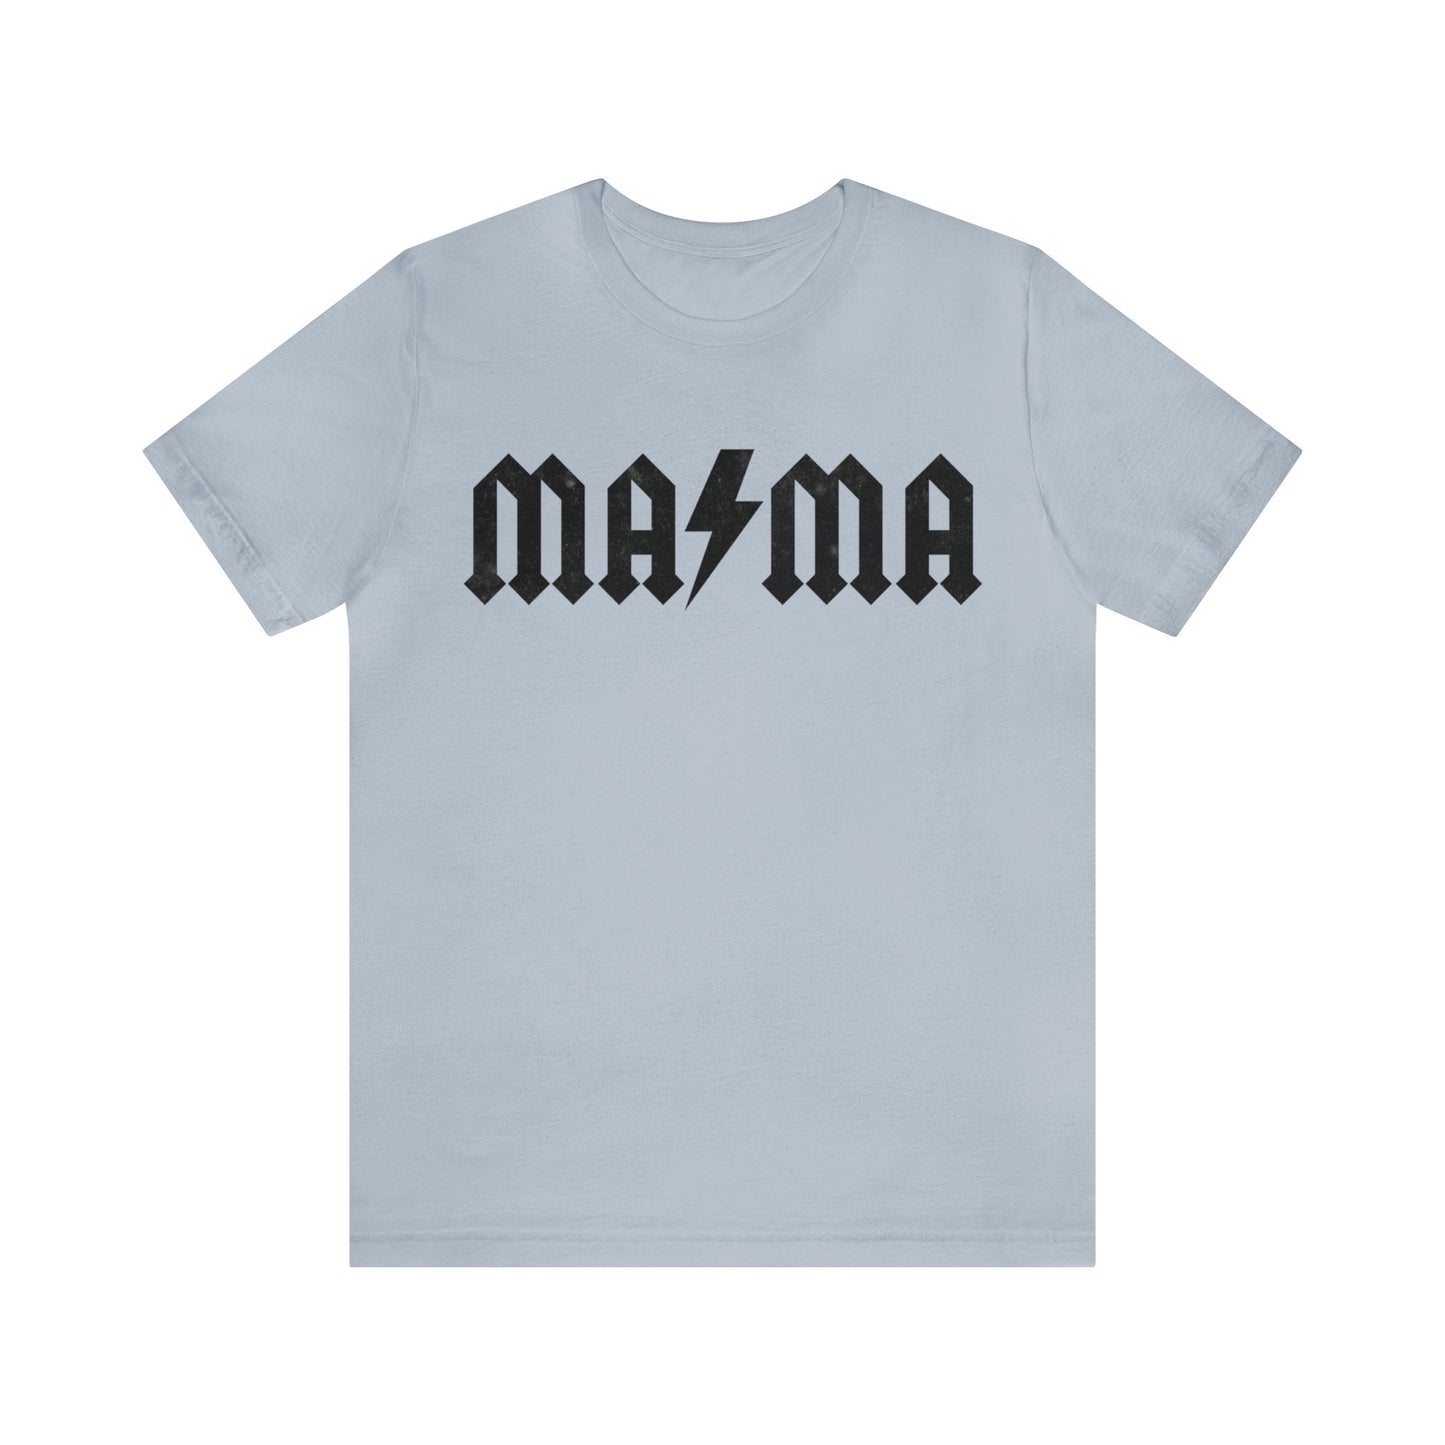 Retro Mama Checkered Shirt, Mom Shirt, Mothers Day Gift, Retro Mama Shirt, Best Mama Shirt from Daughter, Gift for Best Mom, T1156